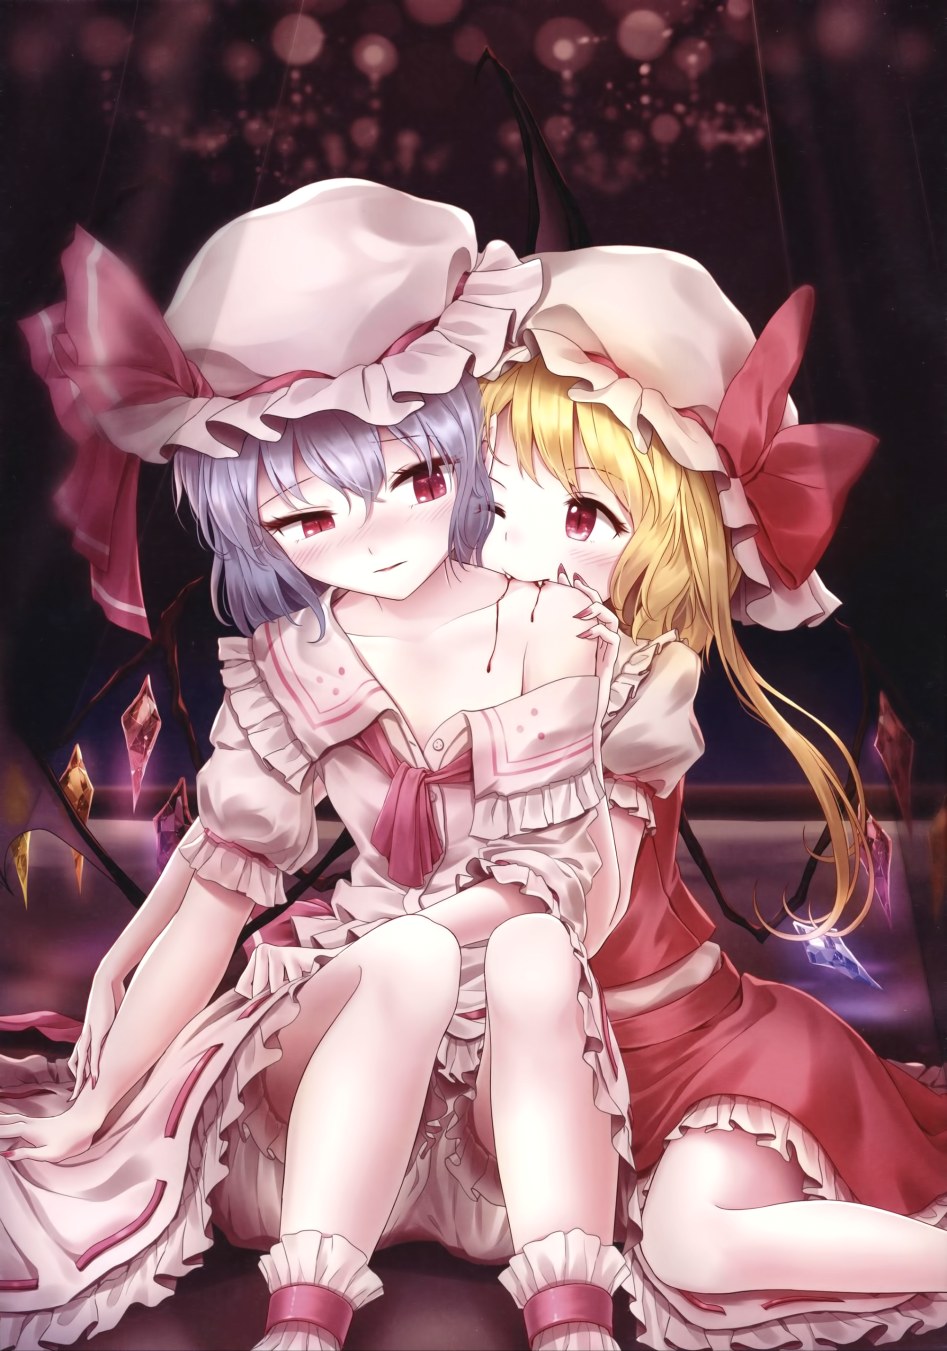 __flandre_scarlet_and_remilia_scarlet_touhou_drawn_by_minust__846c5aa8f68c40d941a209eb1f71848e.png